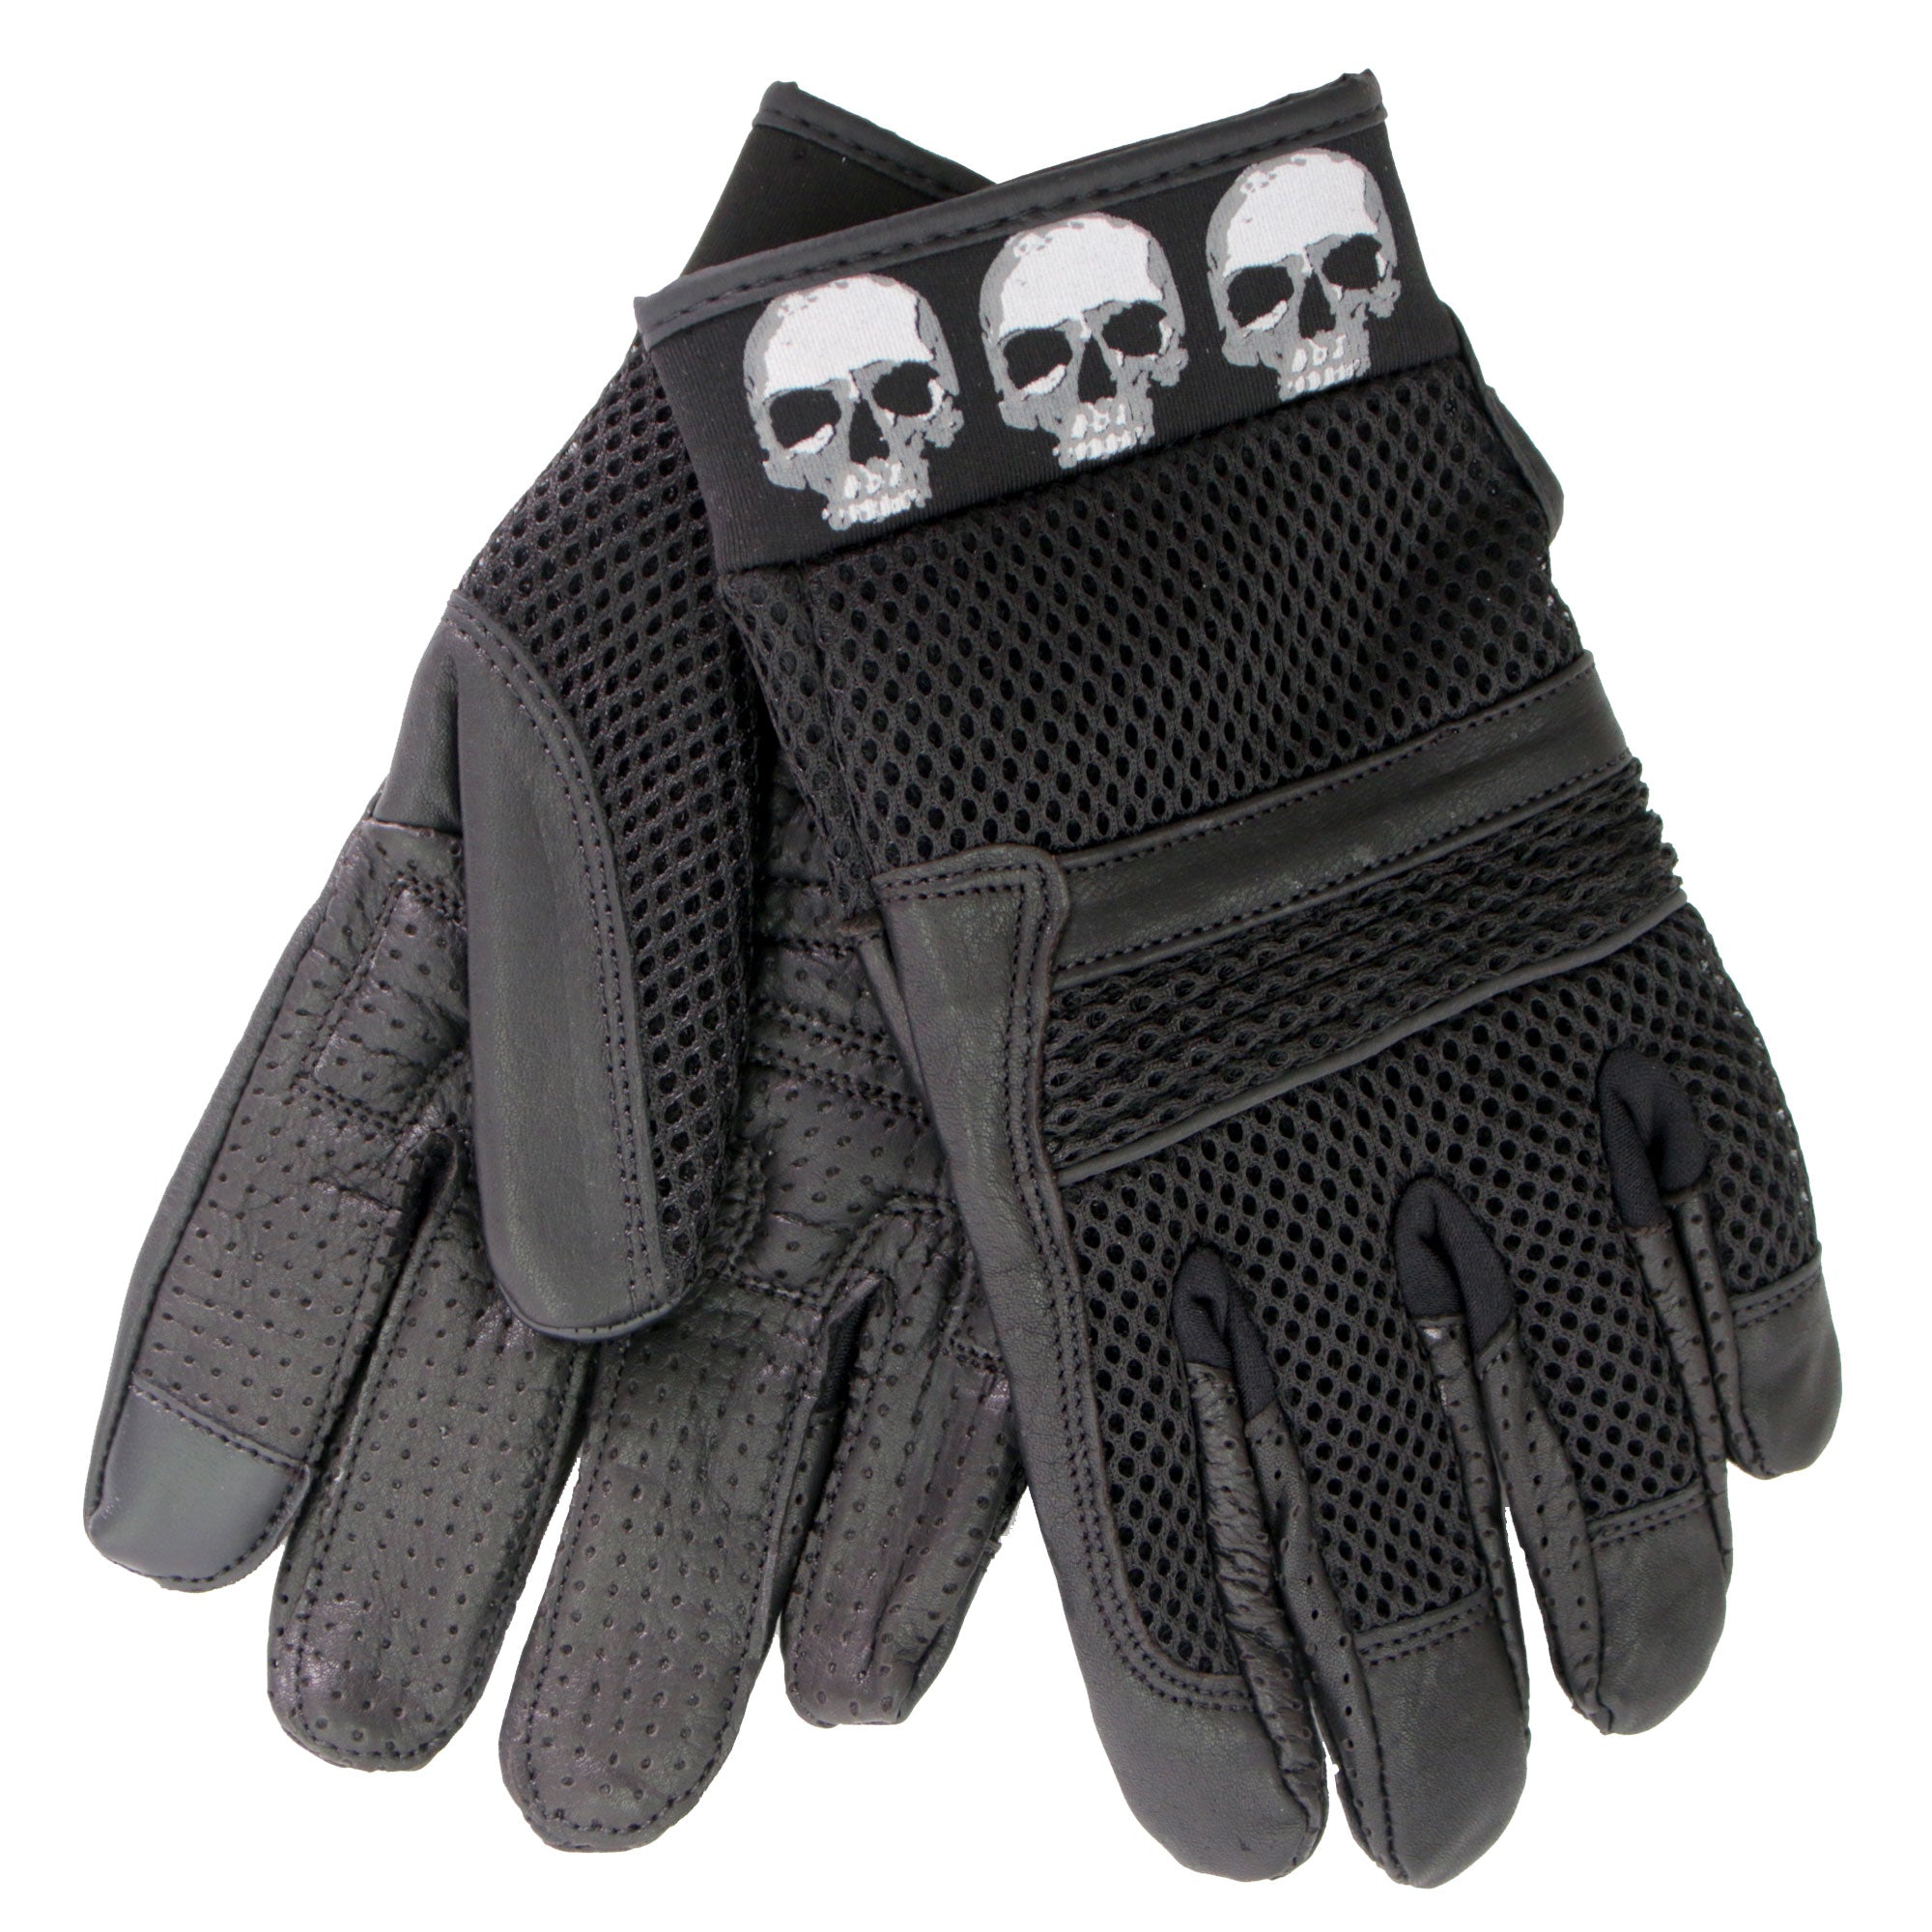 Hot Leathers GVM1301 Uni-Sex Black 'Row of Skulls' Leather and Mesh Gloves